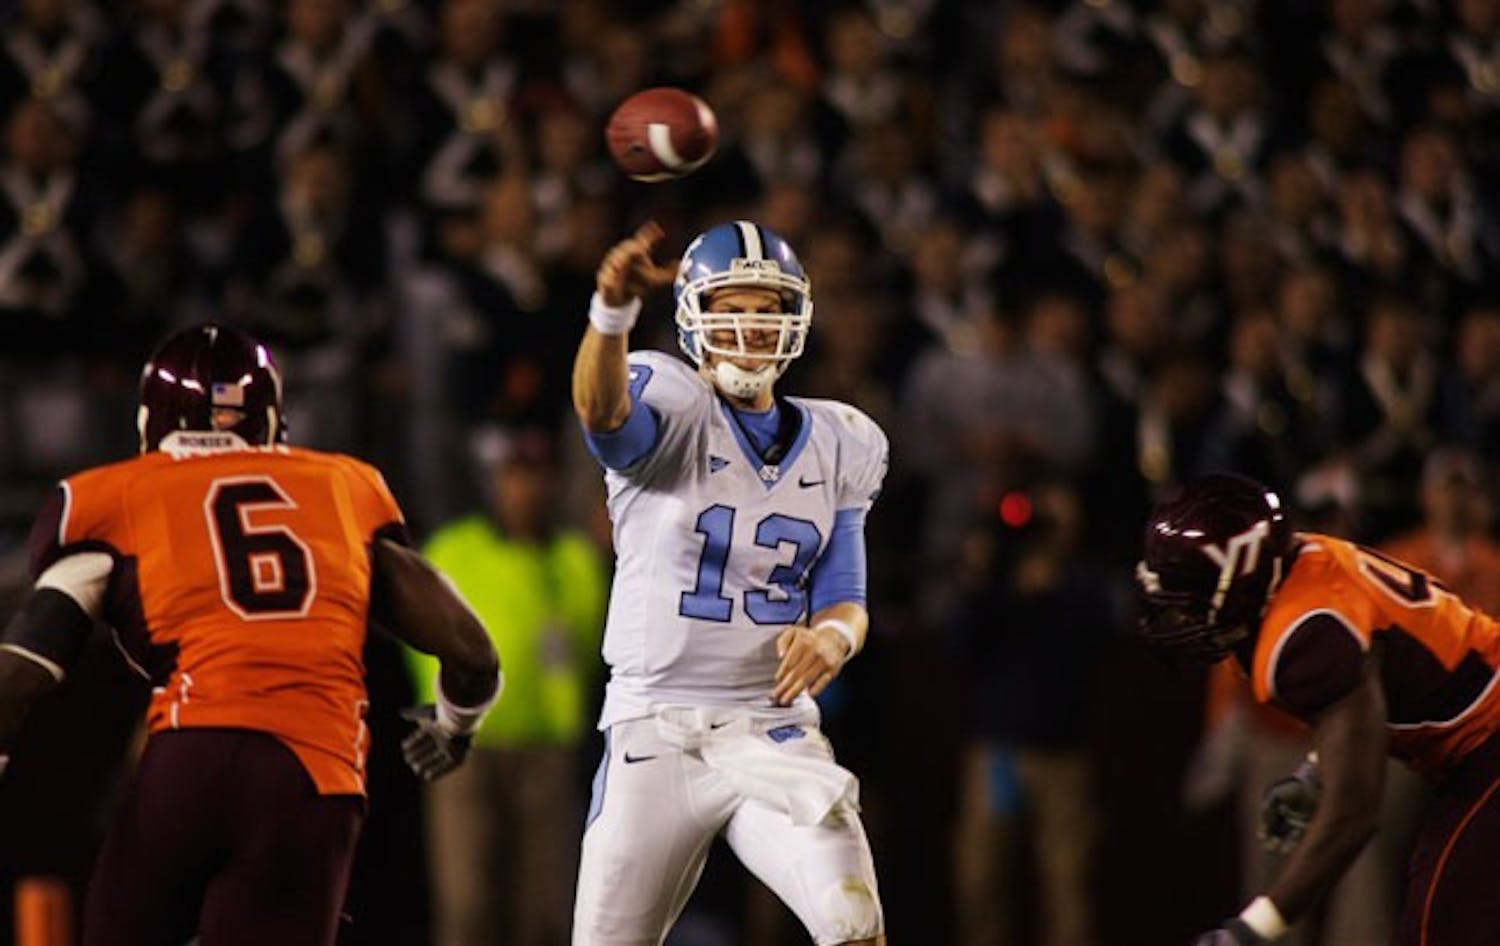 Quarterback T.J. Yates and the Tar Heels are coming off perhaps their biggest win of the season. DTH File/Andrew Dye